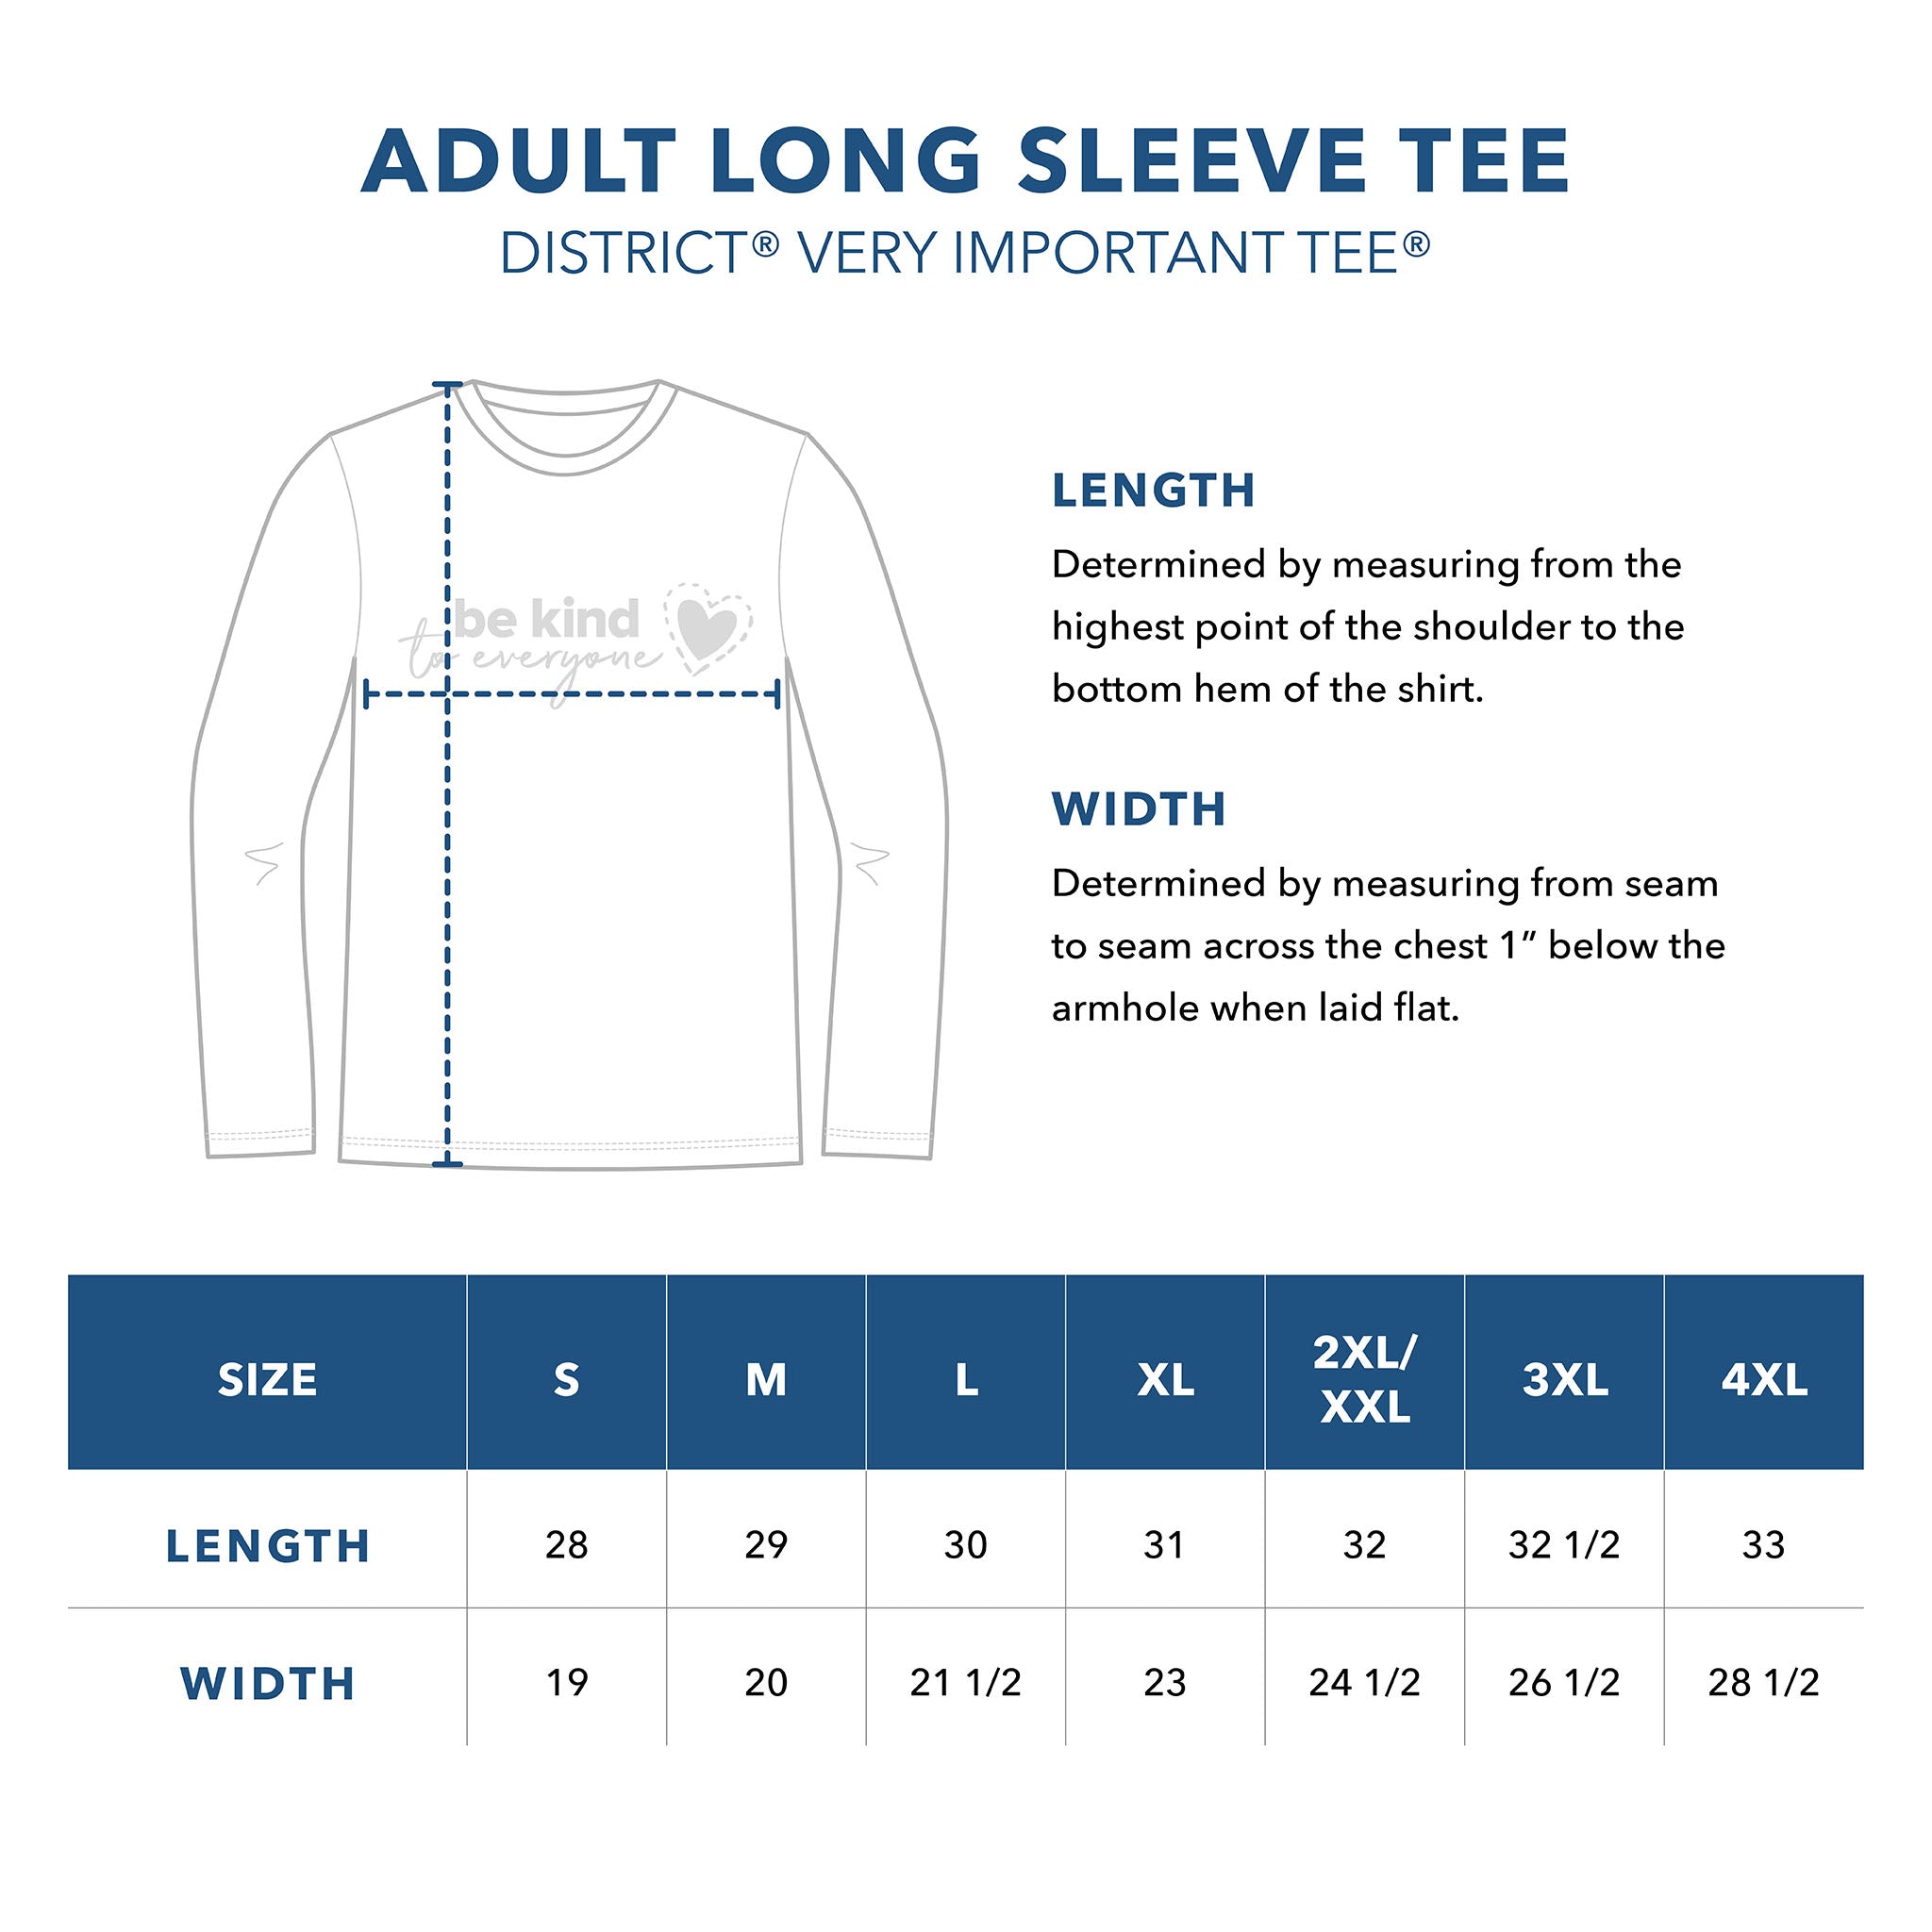 Adult District Very Important Long Sleeve Tee Sizing Guide